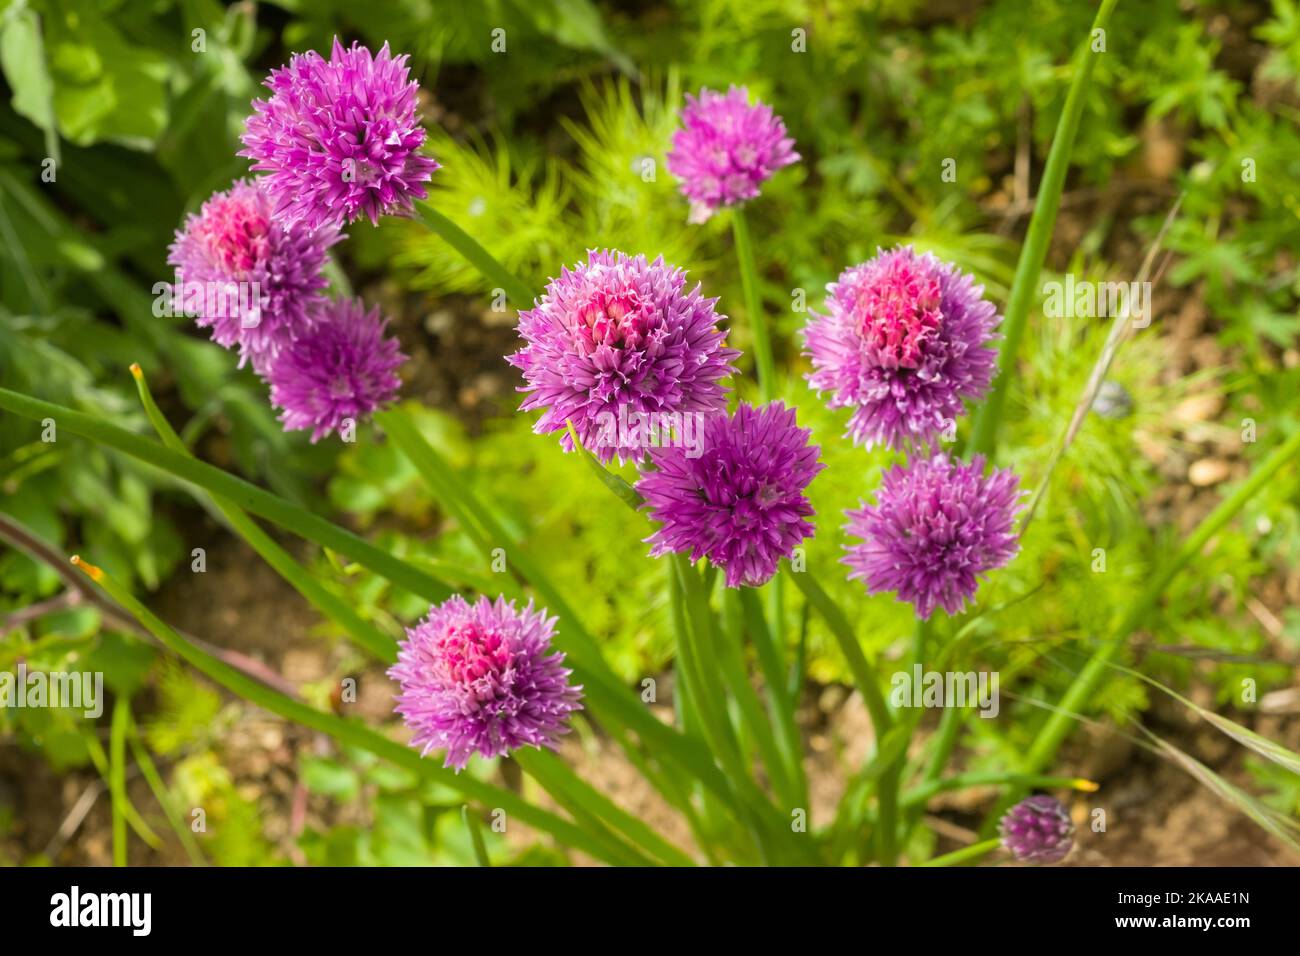 Chives, the colourful pink flowers of the Common Chive, Allium schoenoprasum in a cottage garden Stock Photo